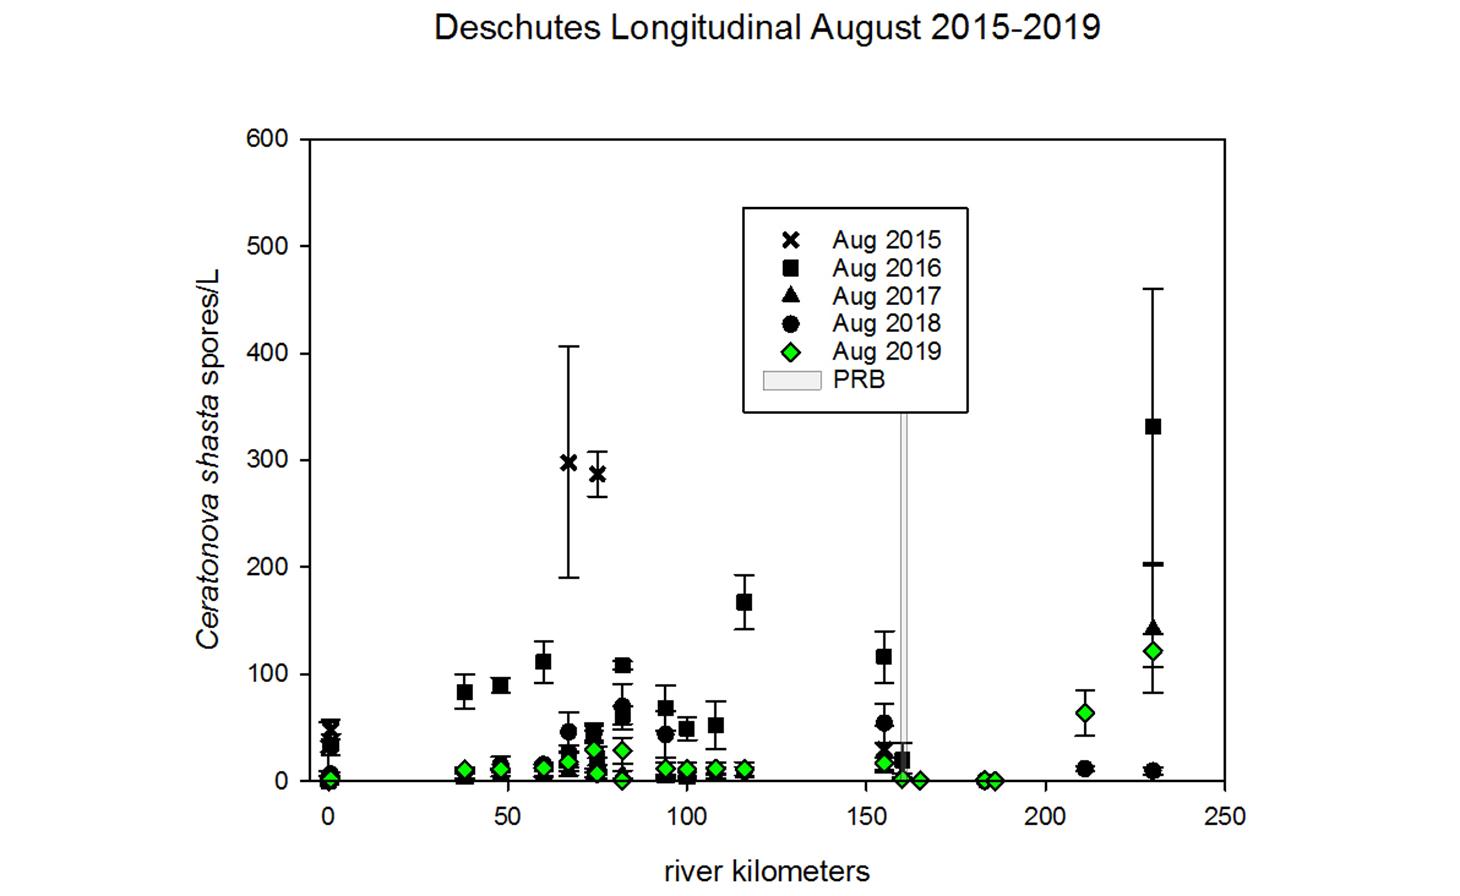 An image of a scatterplot chart comparing Creatonova shasta spores/L with river kilometers from 2015-2019 in August.